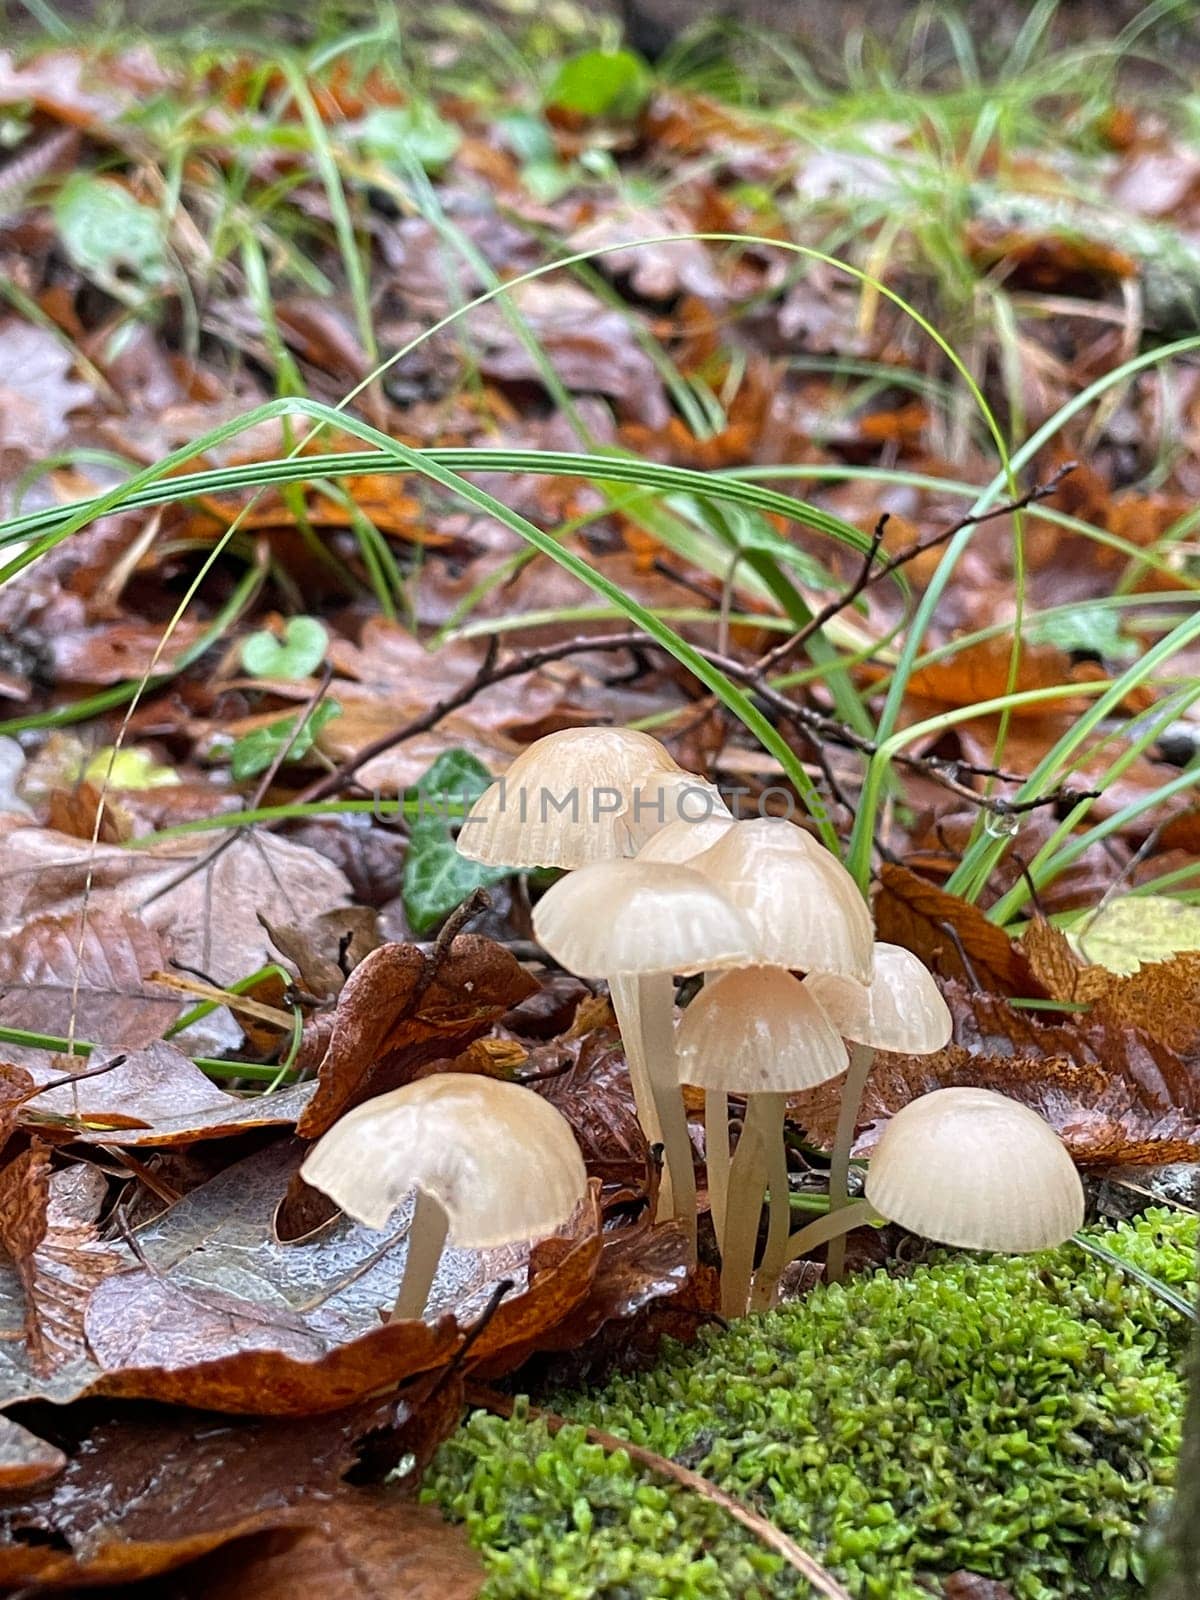 grebe mushrooms in the autumn forest